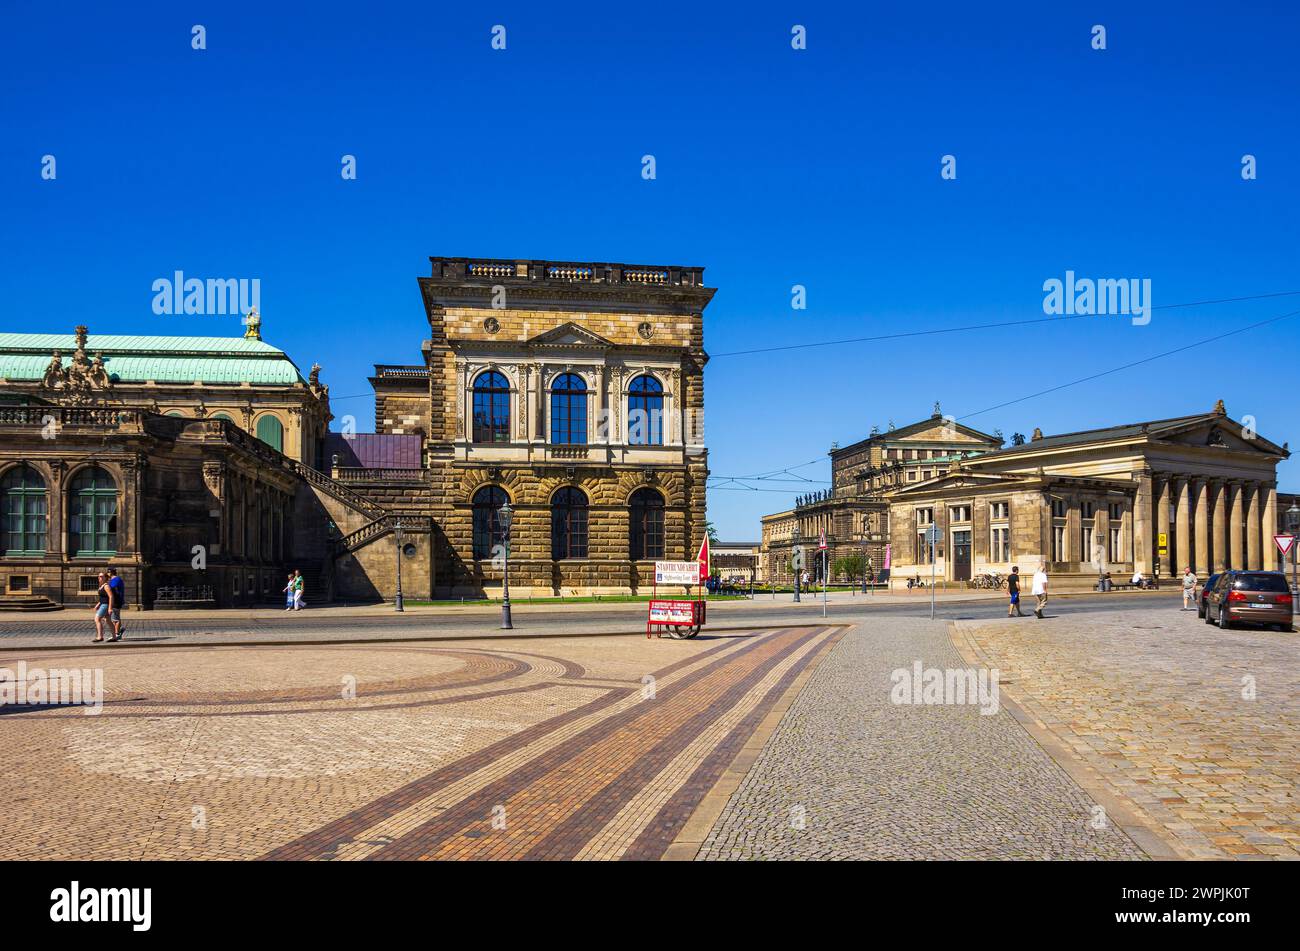 Ticket sales stand and stop for sightseeing tours on Sophienstrasse in front of Zwinger Palace, Inner Old Town, Dresden, Saxony, Germany. Stock Photo